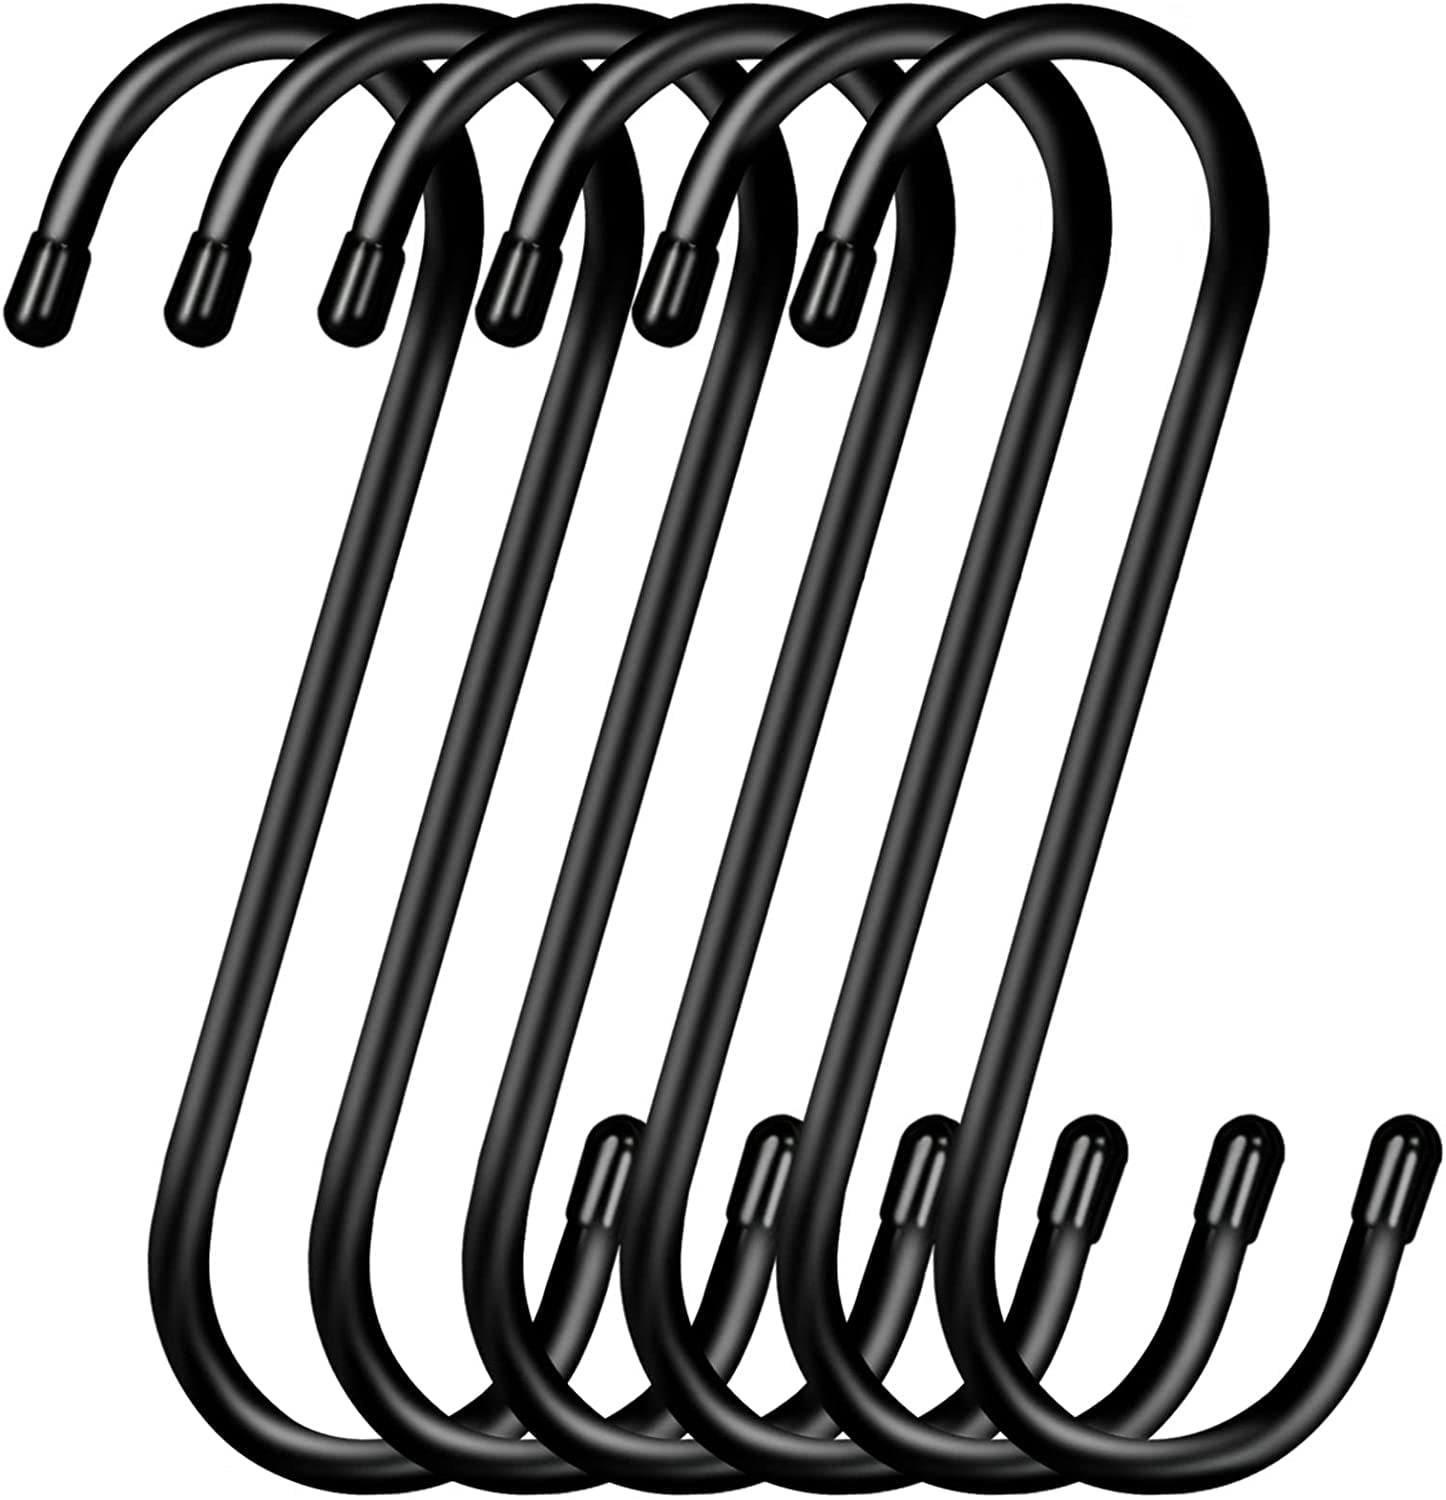 6 Inch Black Large S Hanging Hooks Heavy Duty Thicker S Shaped Hooks for  Hanging Clothes Plants Pans Pots Towels Bags Cups Birdfeeder Extension S  Shaped Hooks for Home,Kitchen,Garden,Patio 